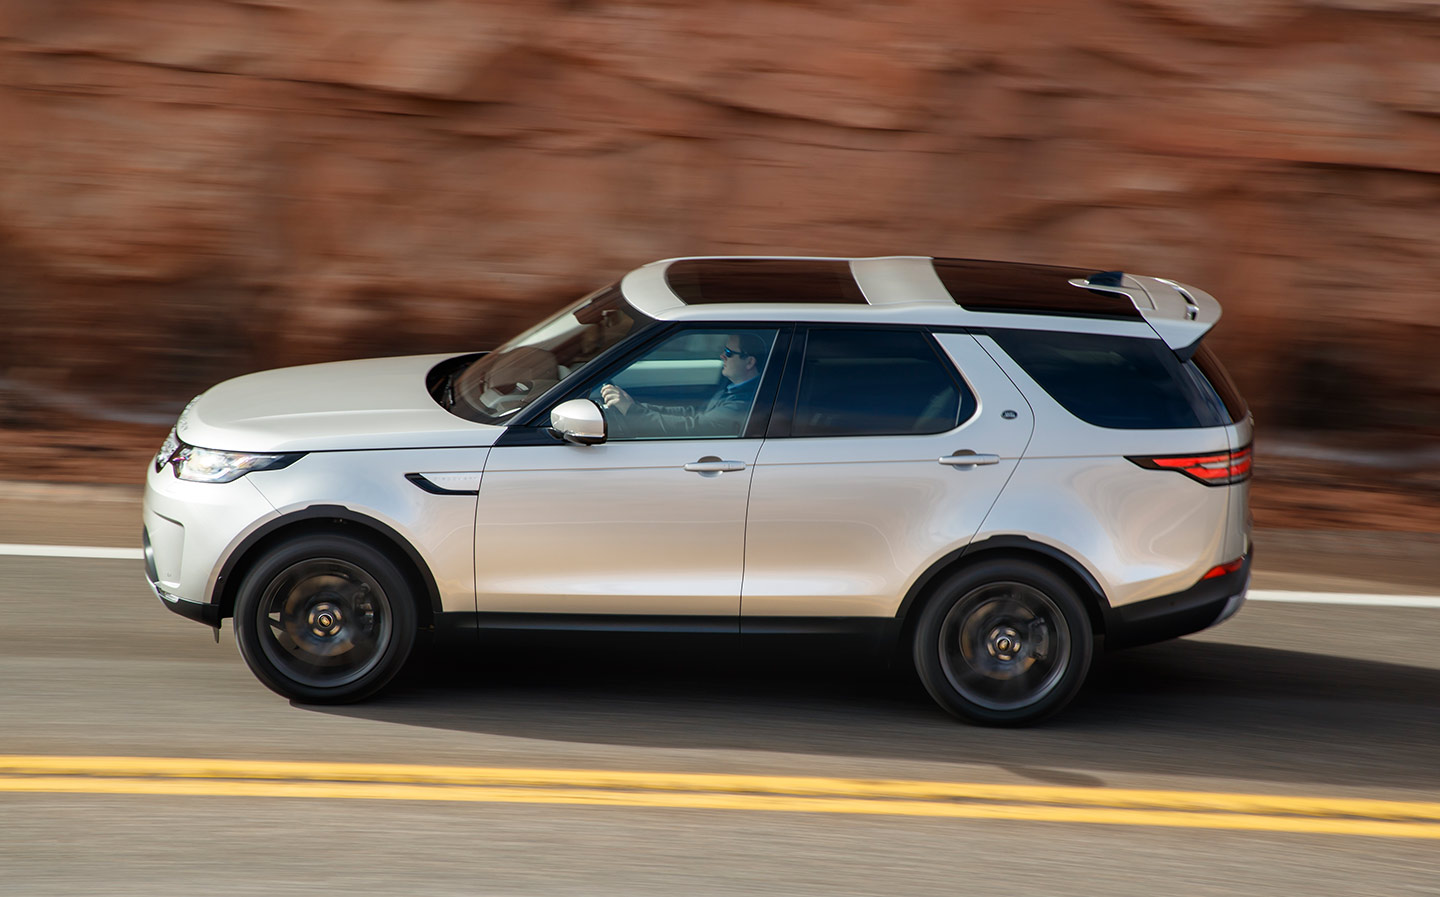 First Drive Review: 2017 Land Rover Discovery